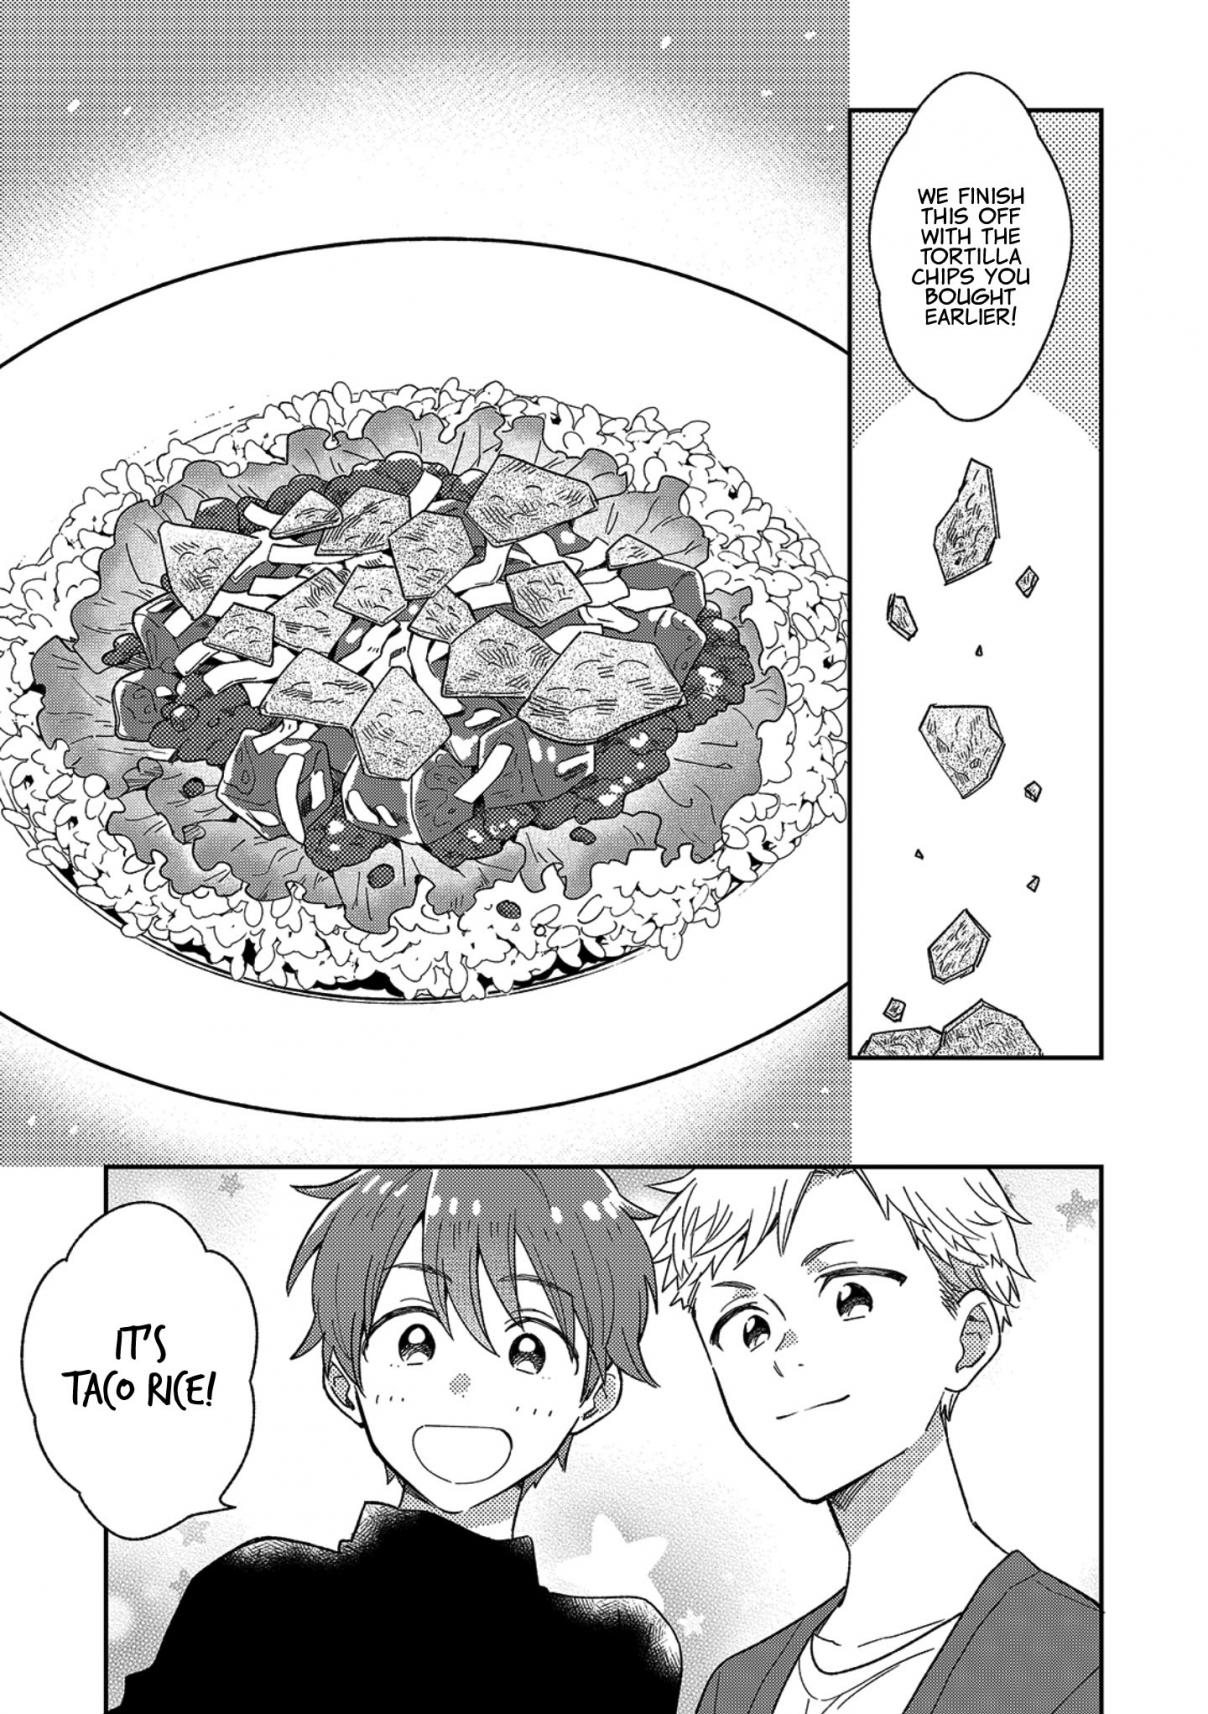 High School Boys Are Hungry Again Today Vol. 1 Ch. 10 Taco Rice